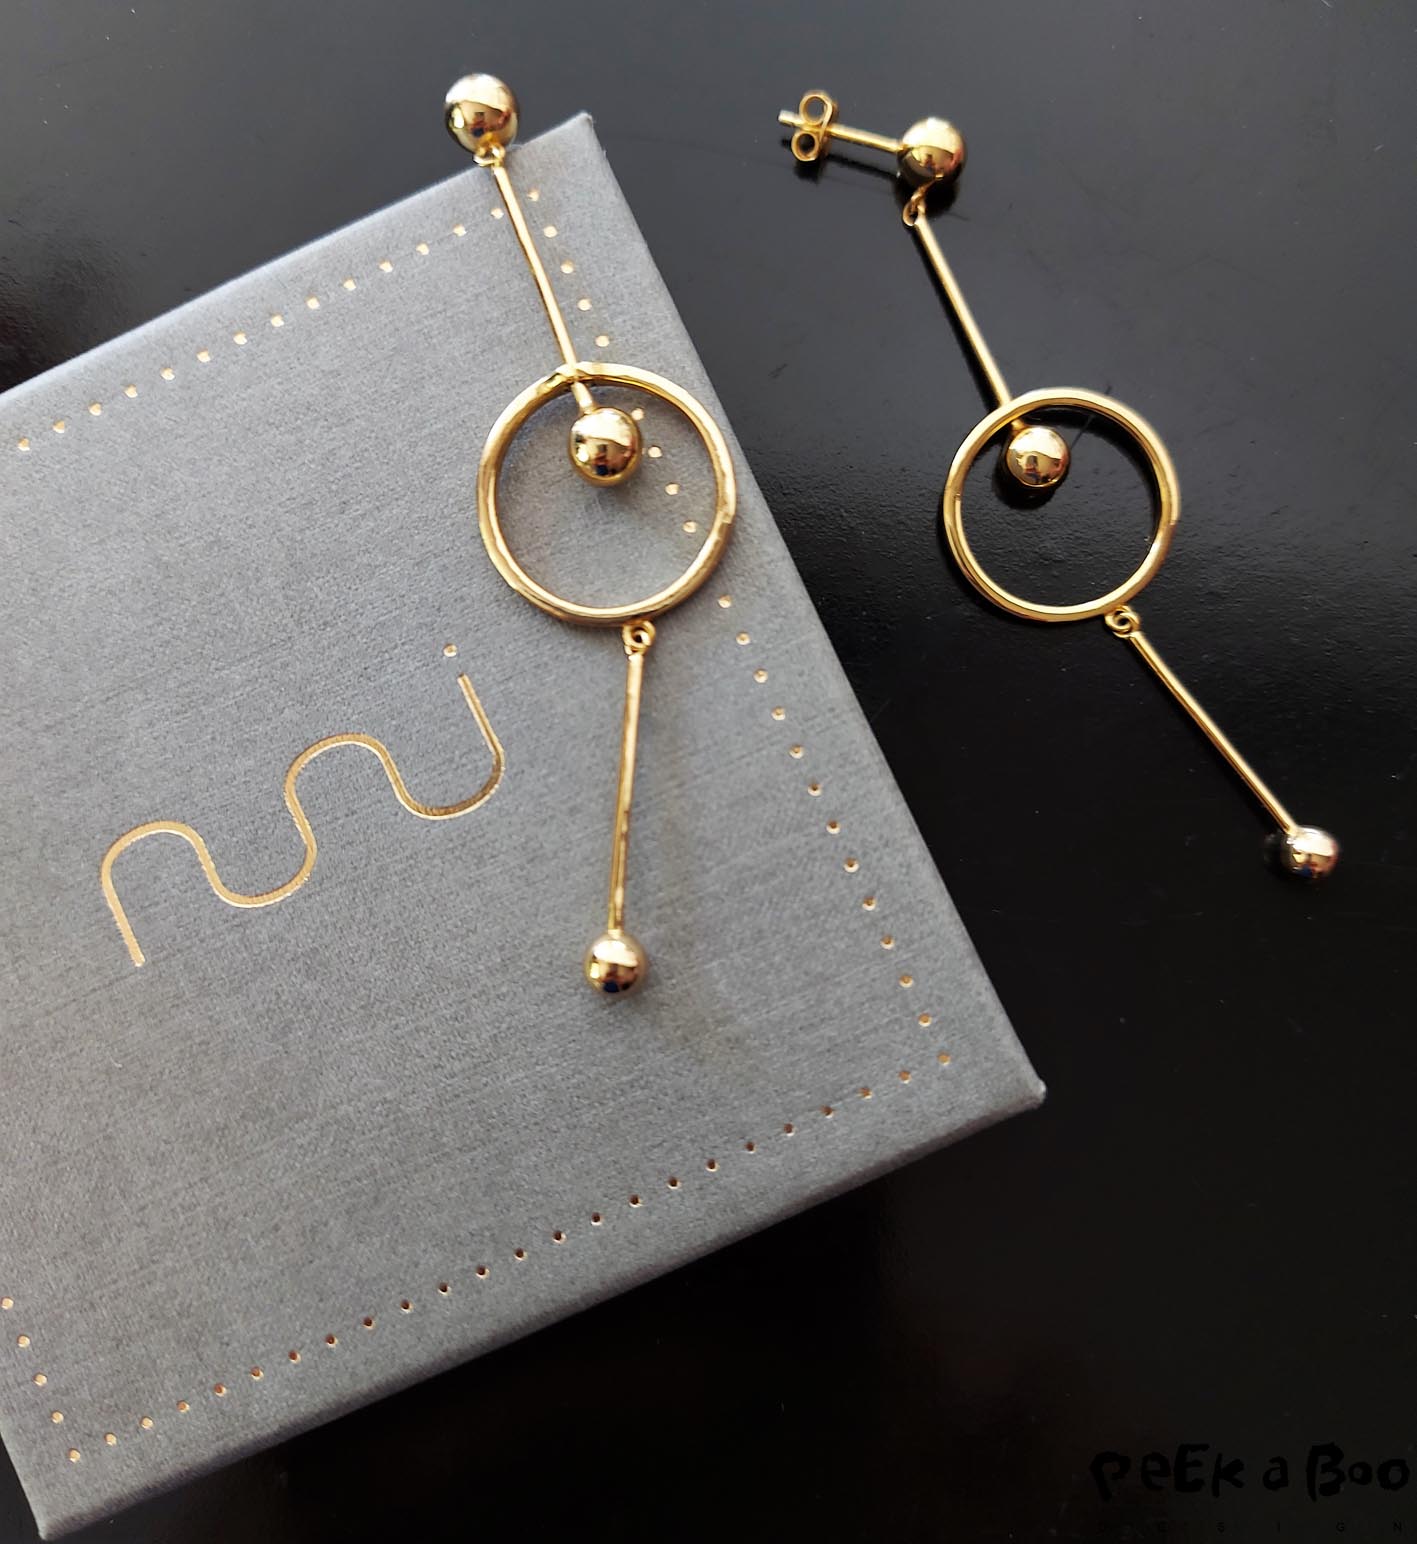 These Aisha earrings are made in 925 silver and 18 carat gold plated.